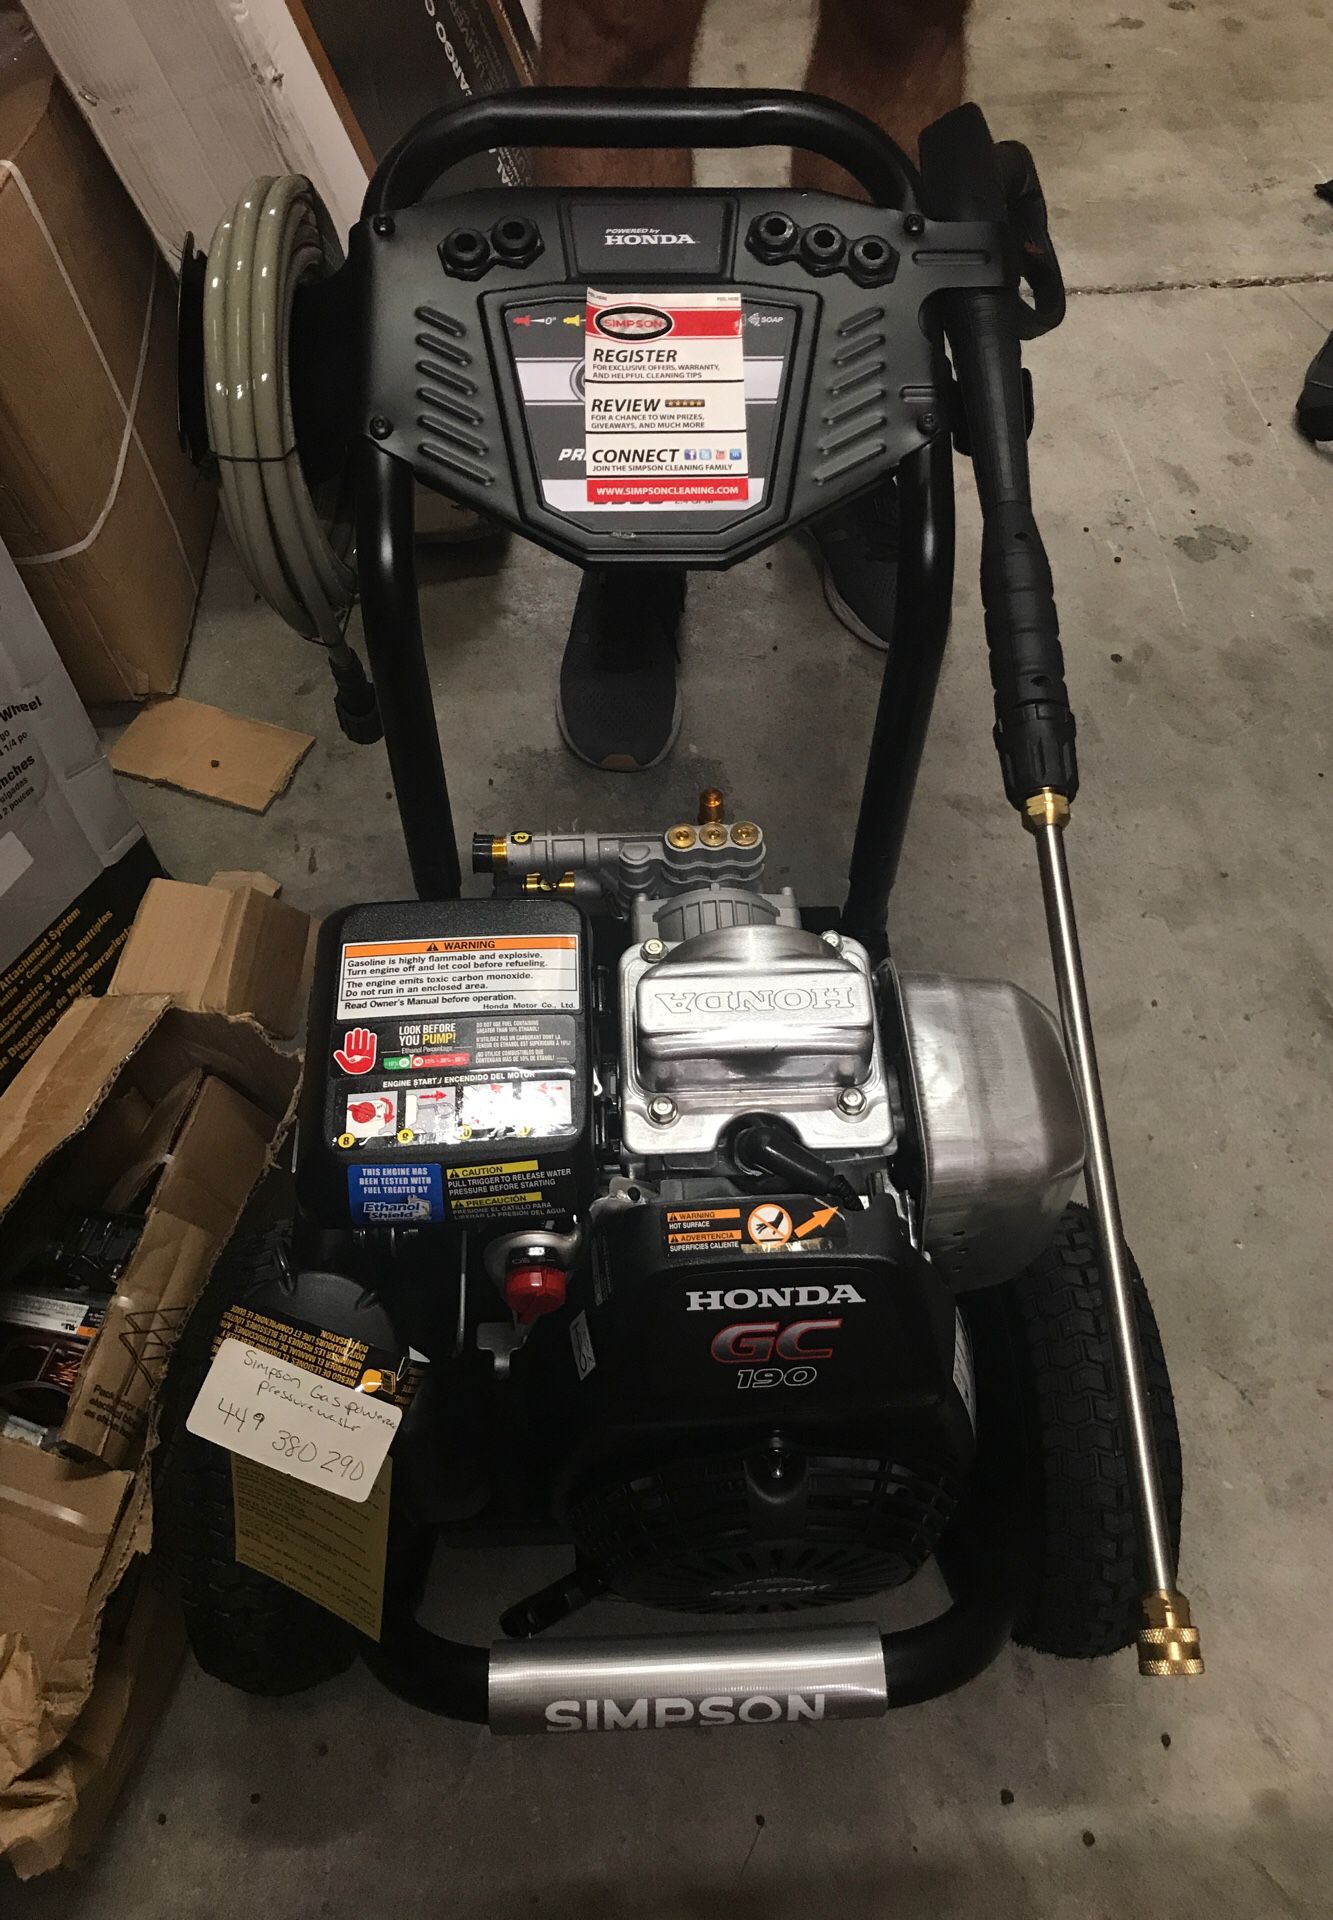 Simpson Gas Pressure Washer 3300psi with Honda motor with 2.4 GPM